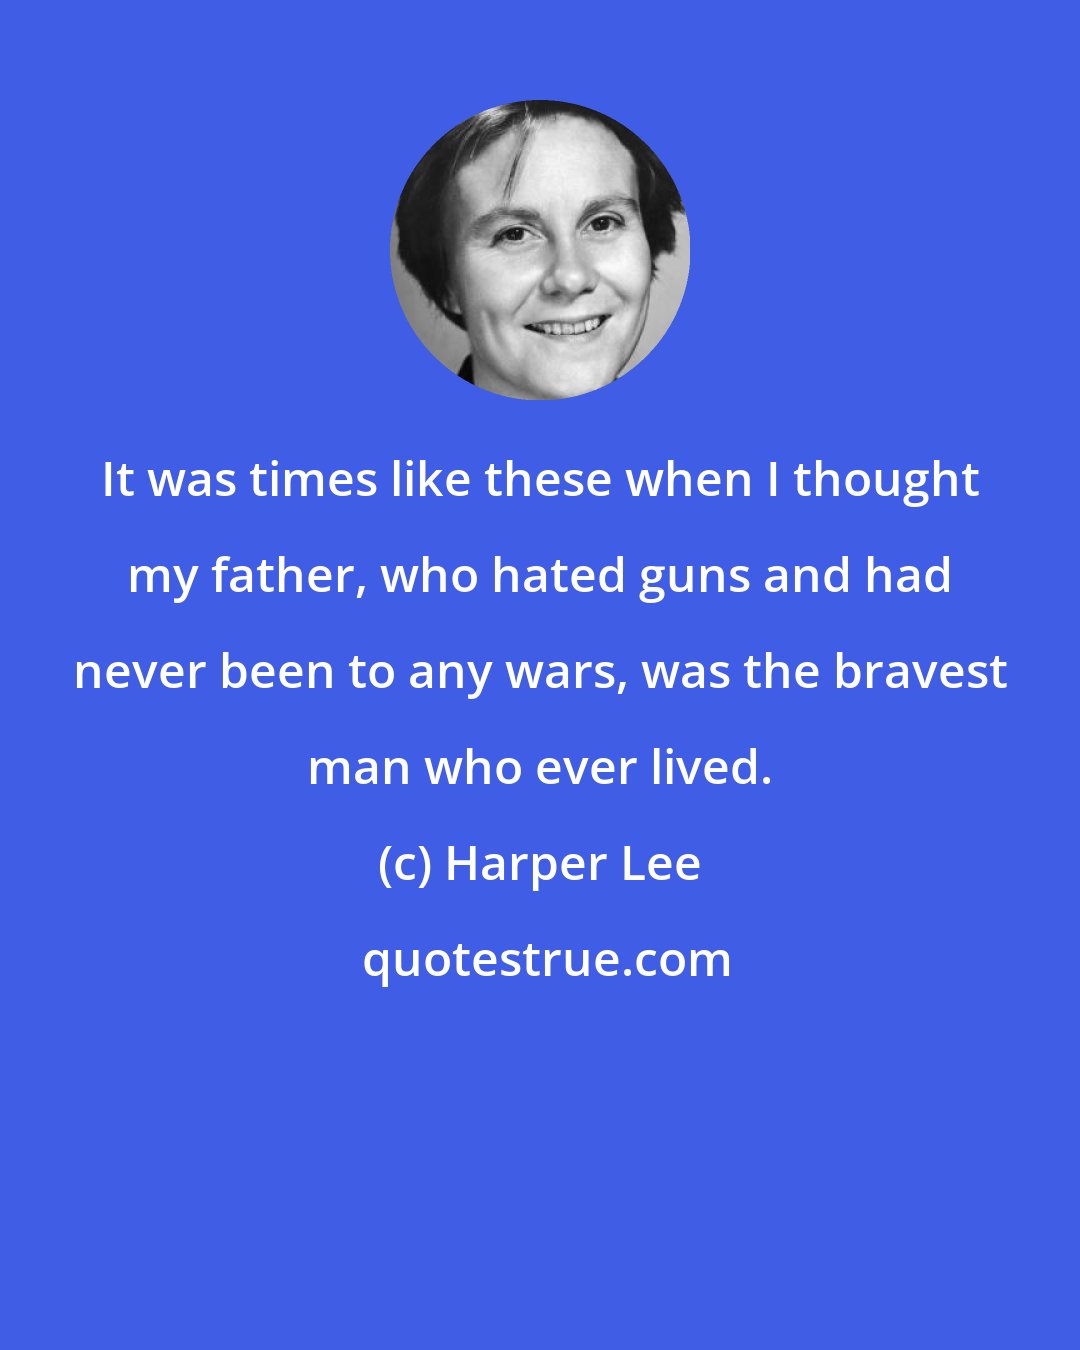 Harper Lee: It was times like these when I thought my father, who hated guns and had never been to any wars, was the bravest man who ever lived.